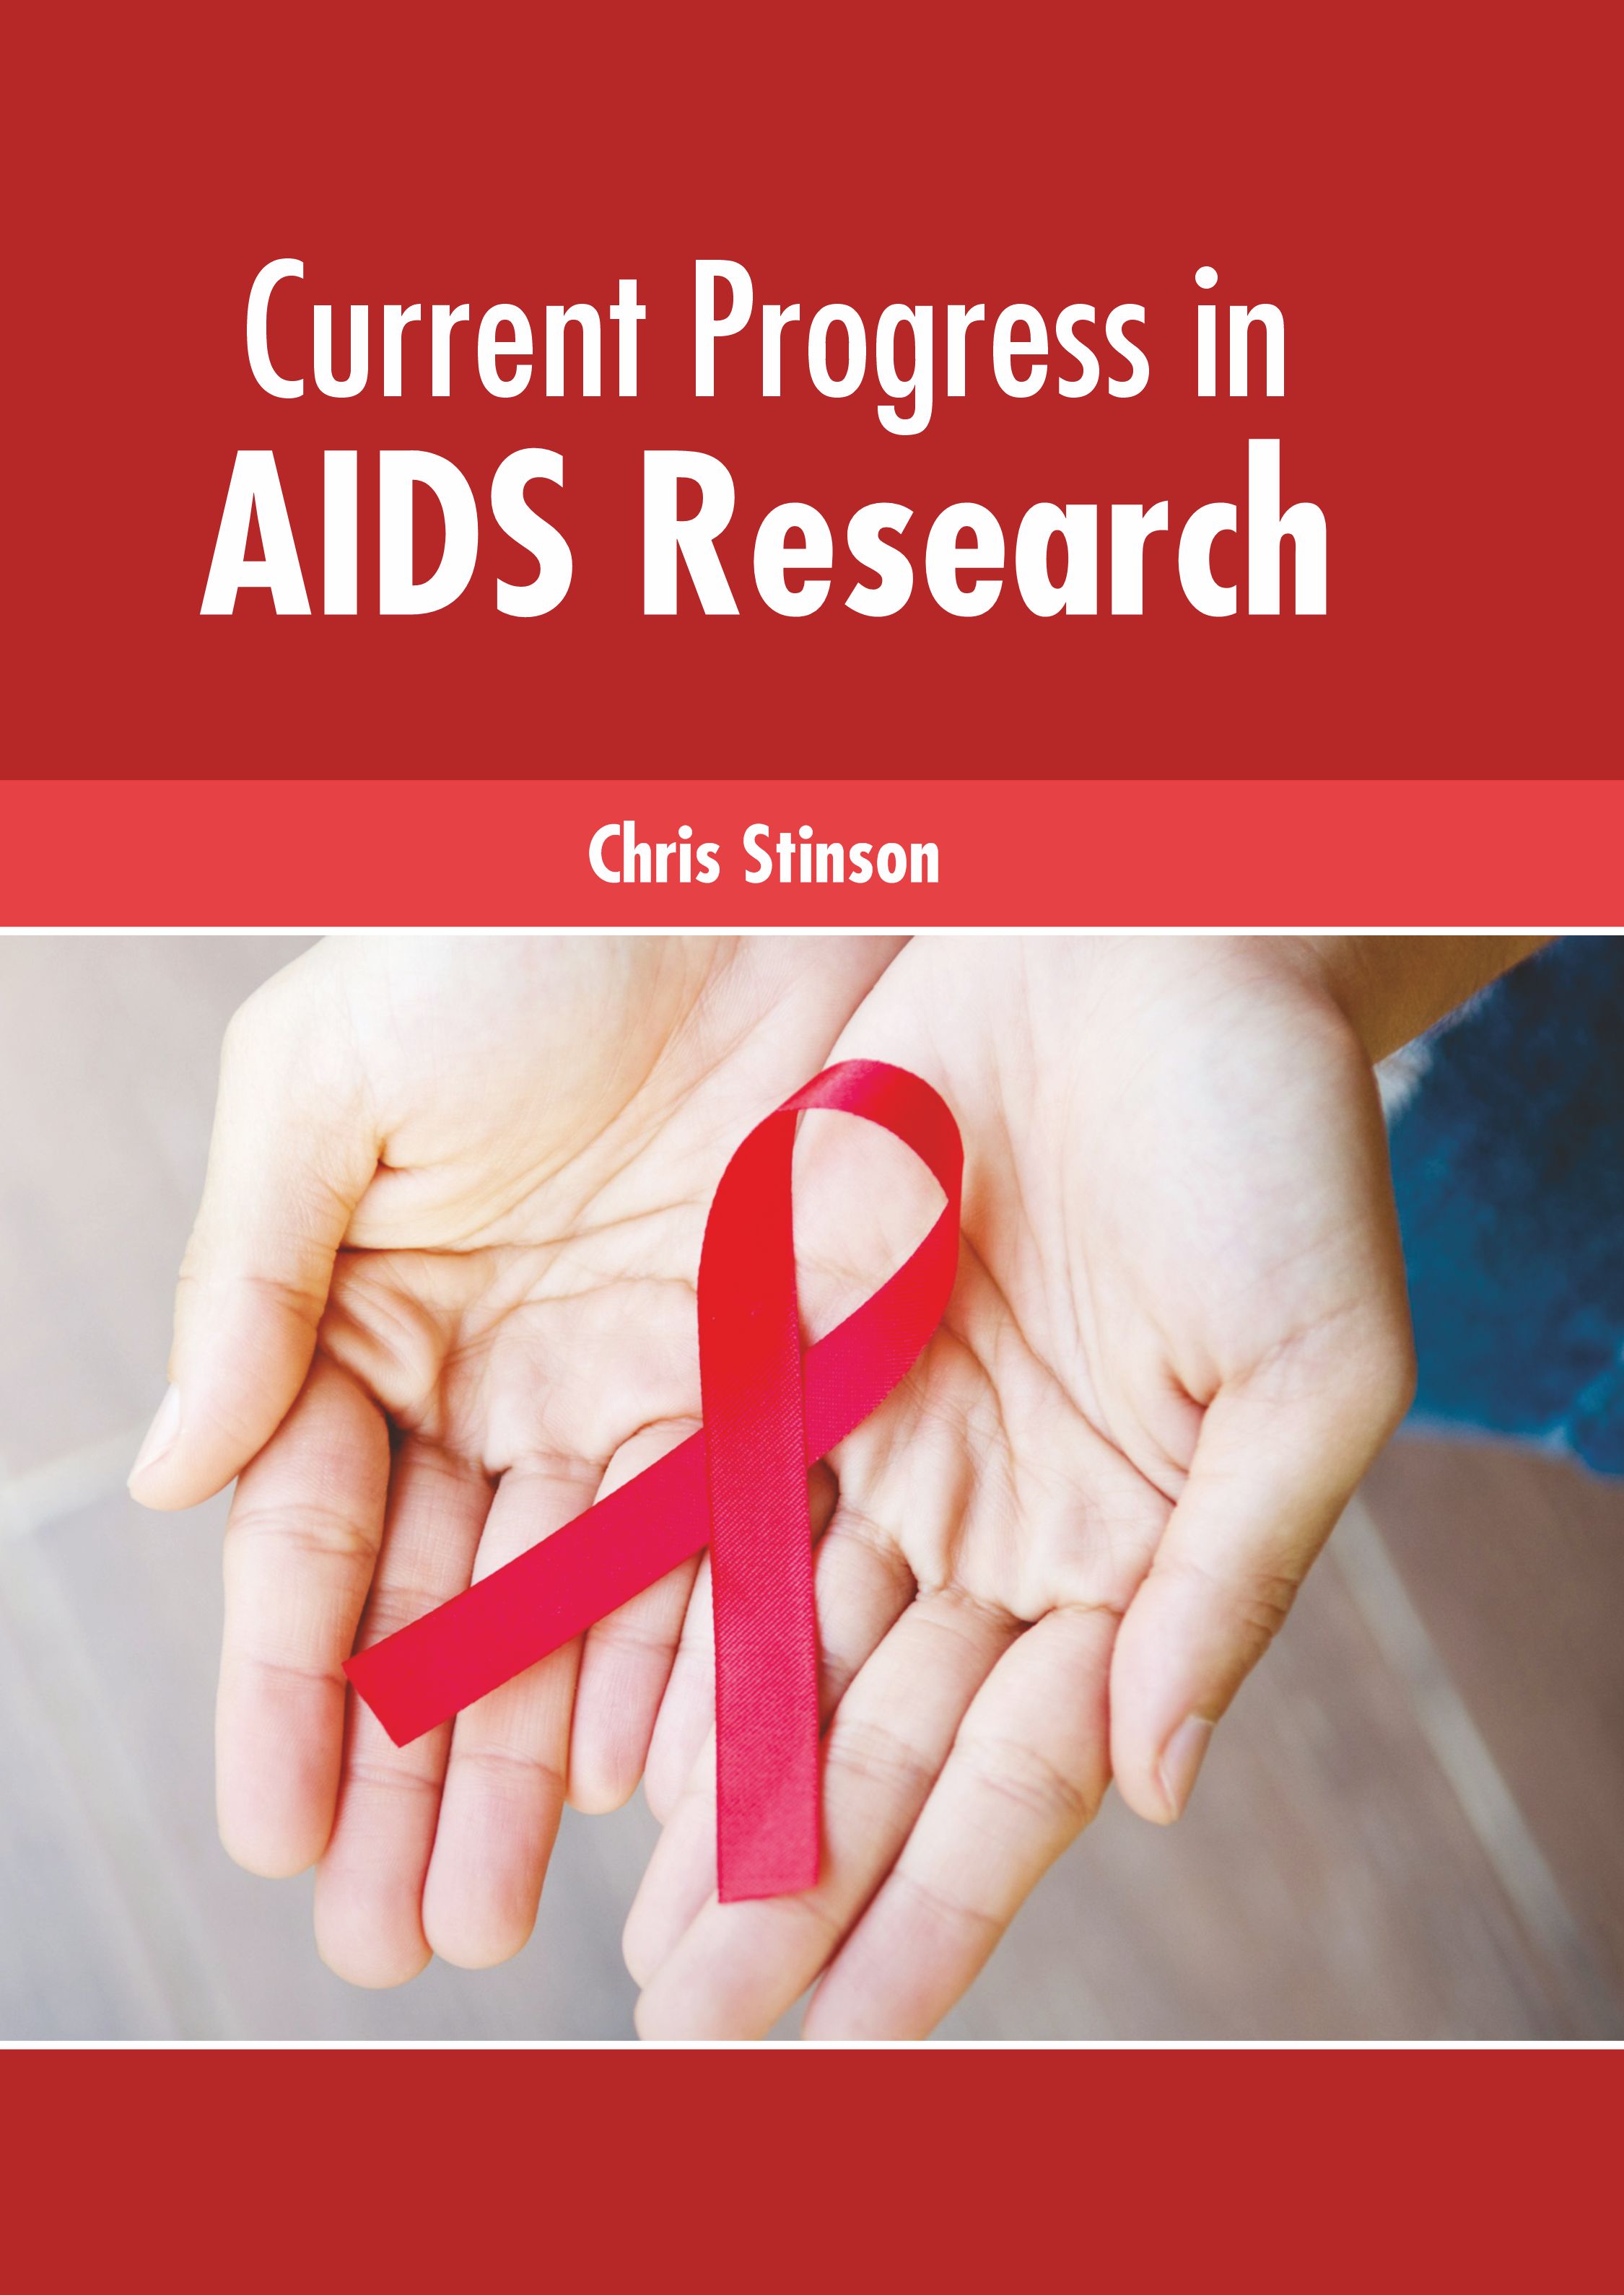 CURRENT PROGRESS IN AIDS RESEARCH